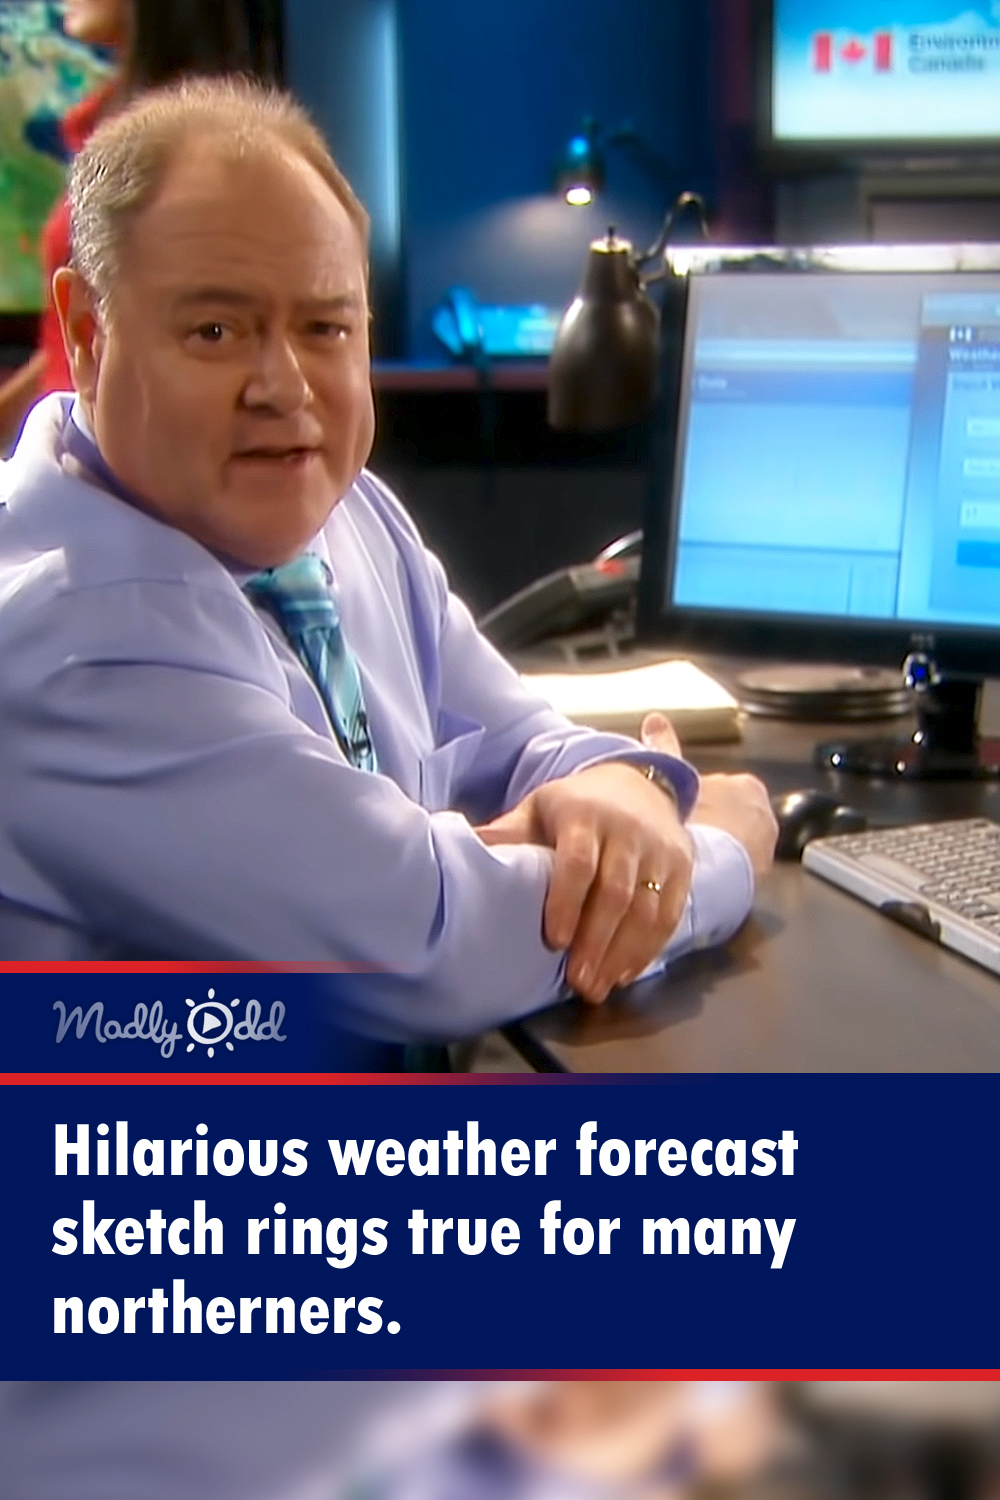 Hilarious weather forecast sketch rings true for many northerners